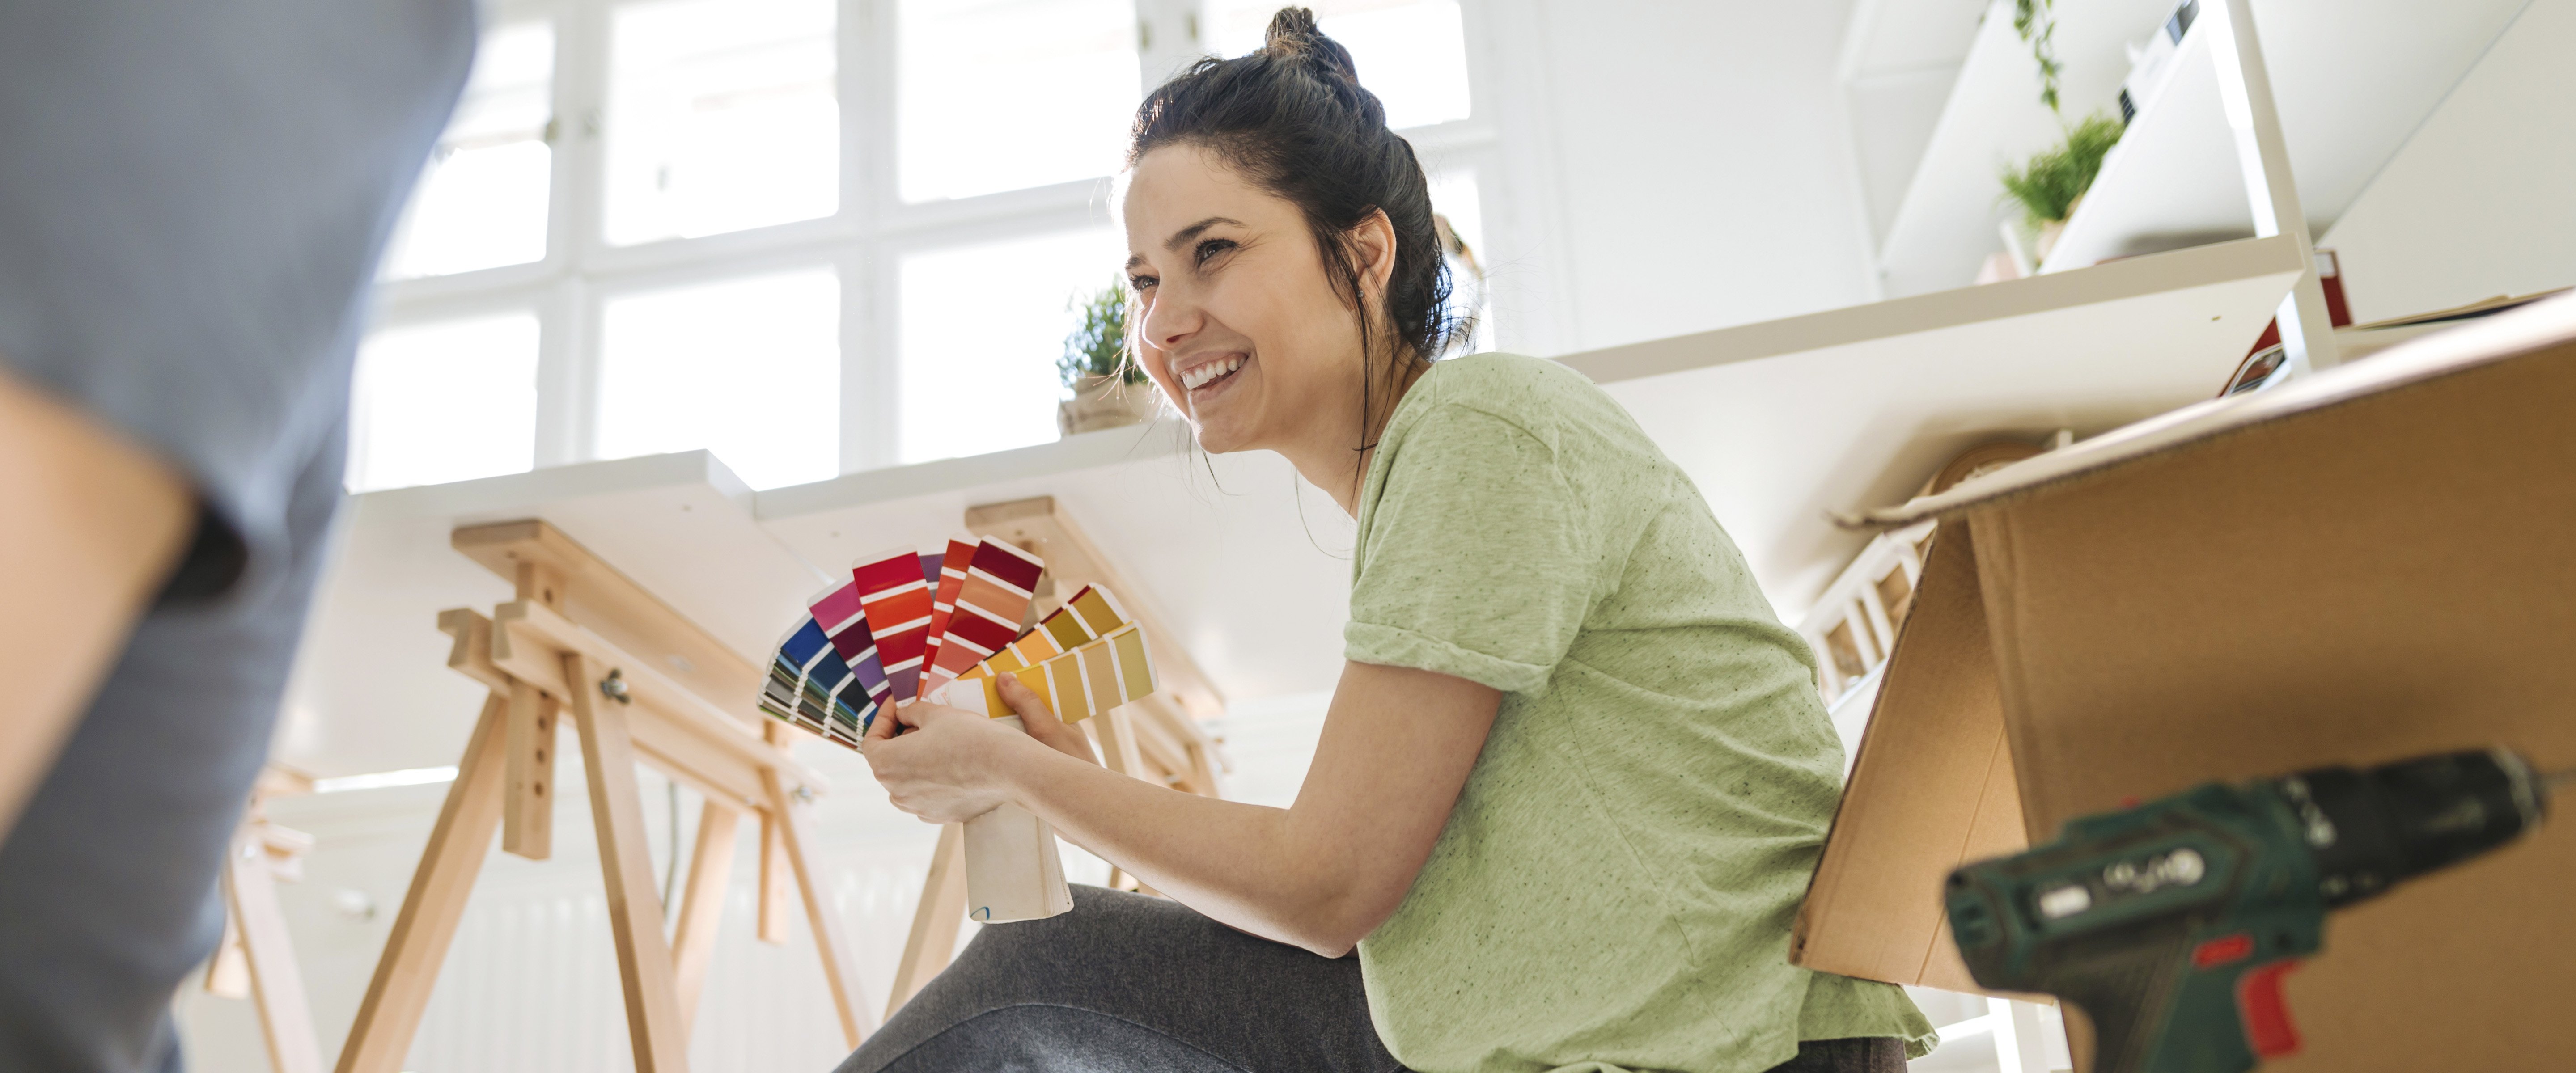 young woman showing paint swatches to husband in new house.jpg